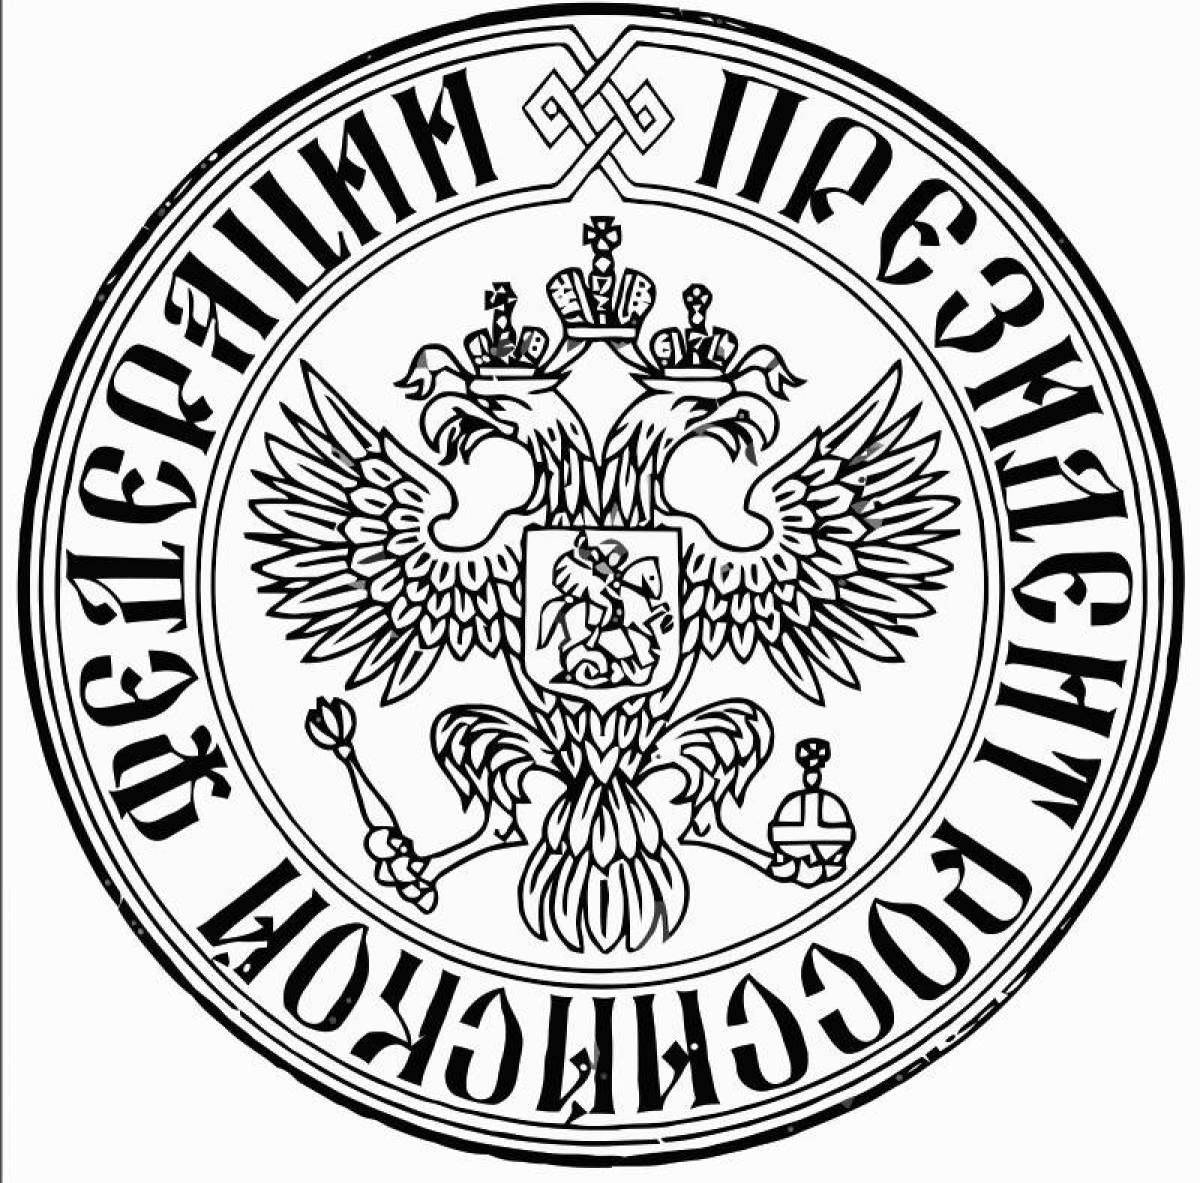 Coat of arms of Russia #2